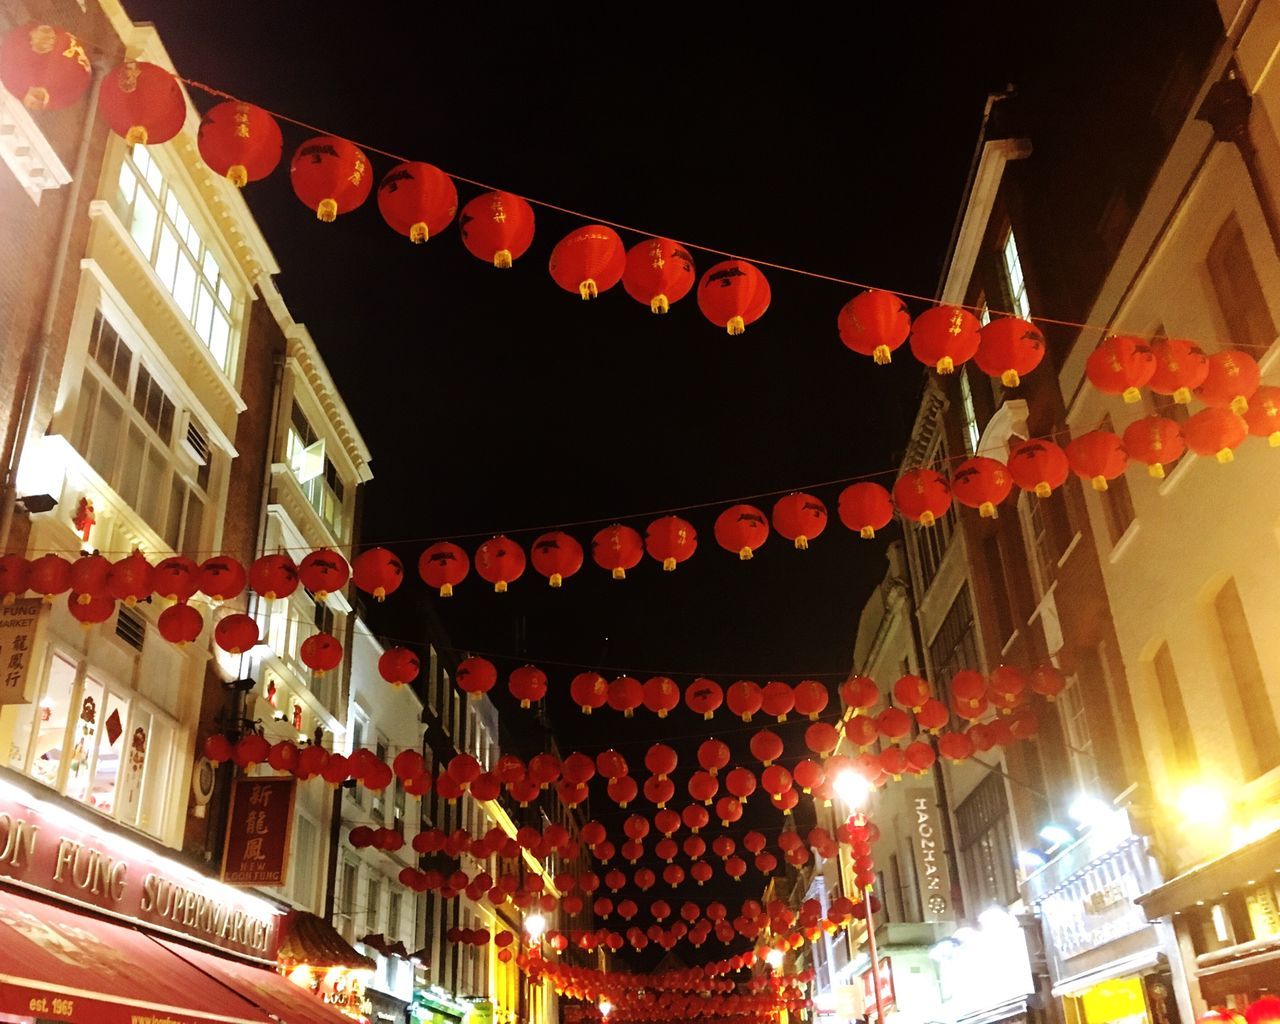 low angle view, architecture, built structure, building exterior, religion, hanging, decoration, place of worship, lantern, illuminated, spirituality, lighting equipment, temple - building, tradition, cultures, chinese lantern, red, night, roof